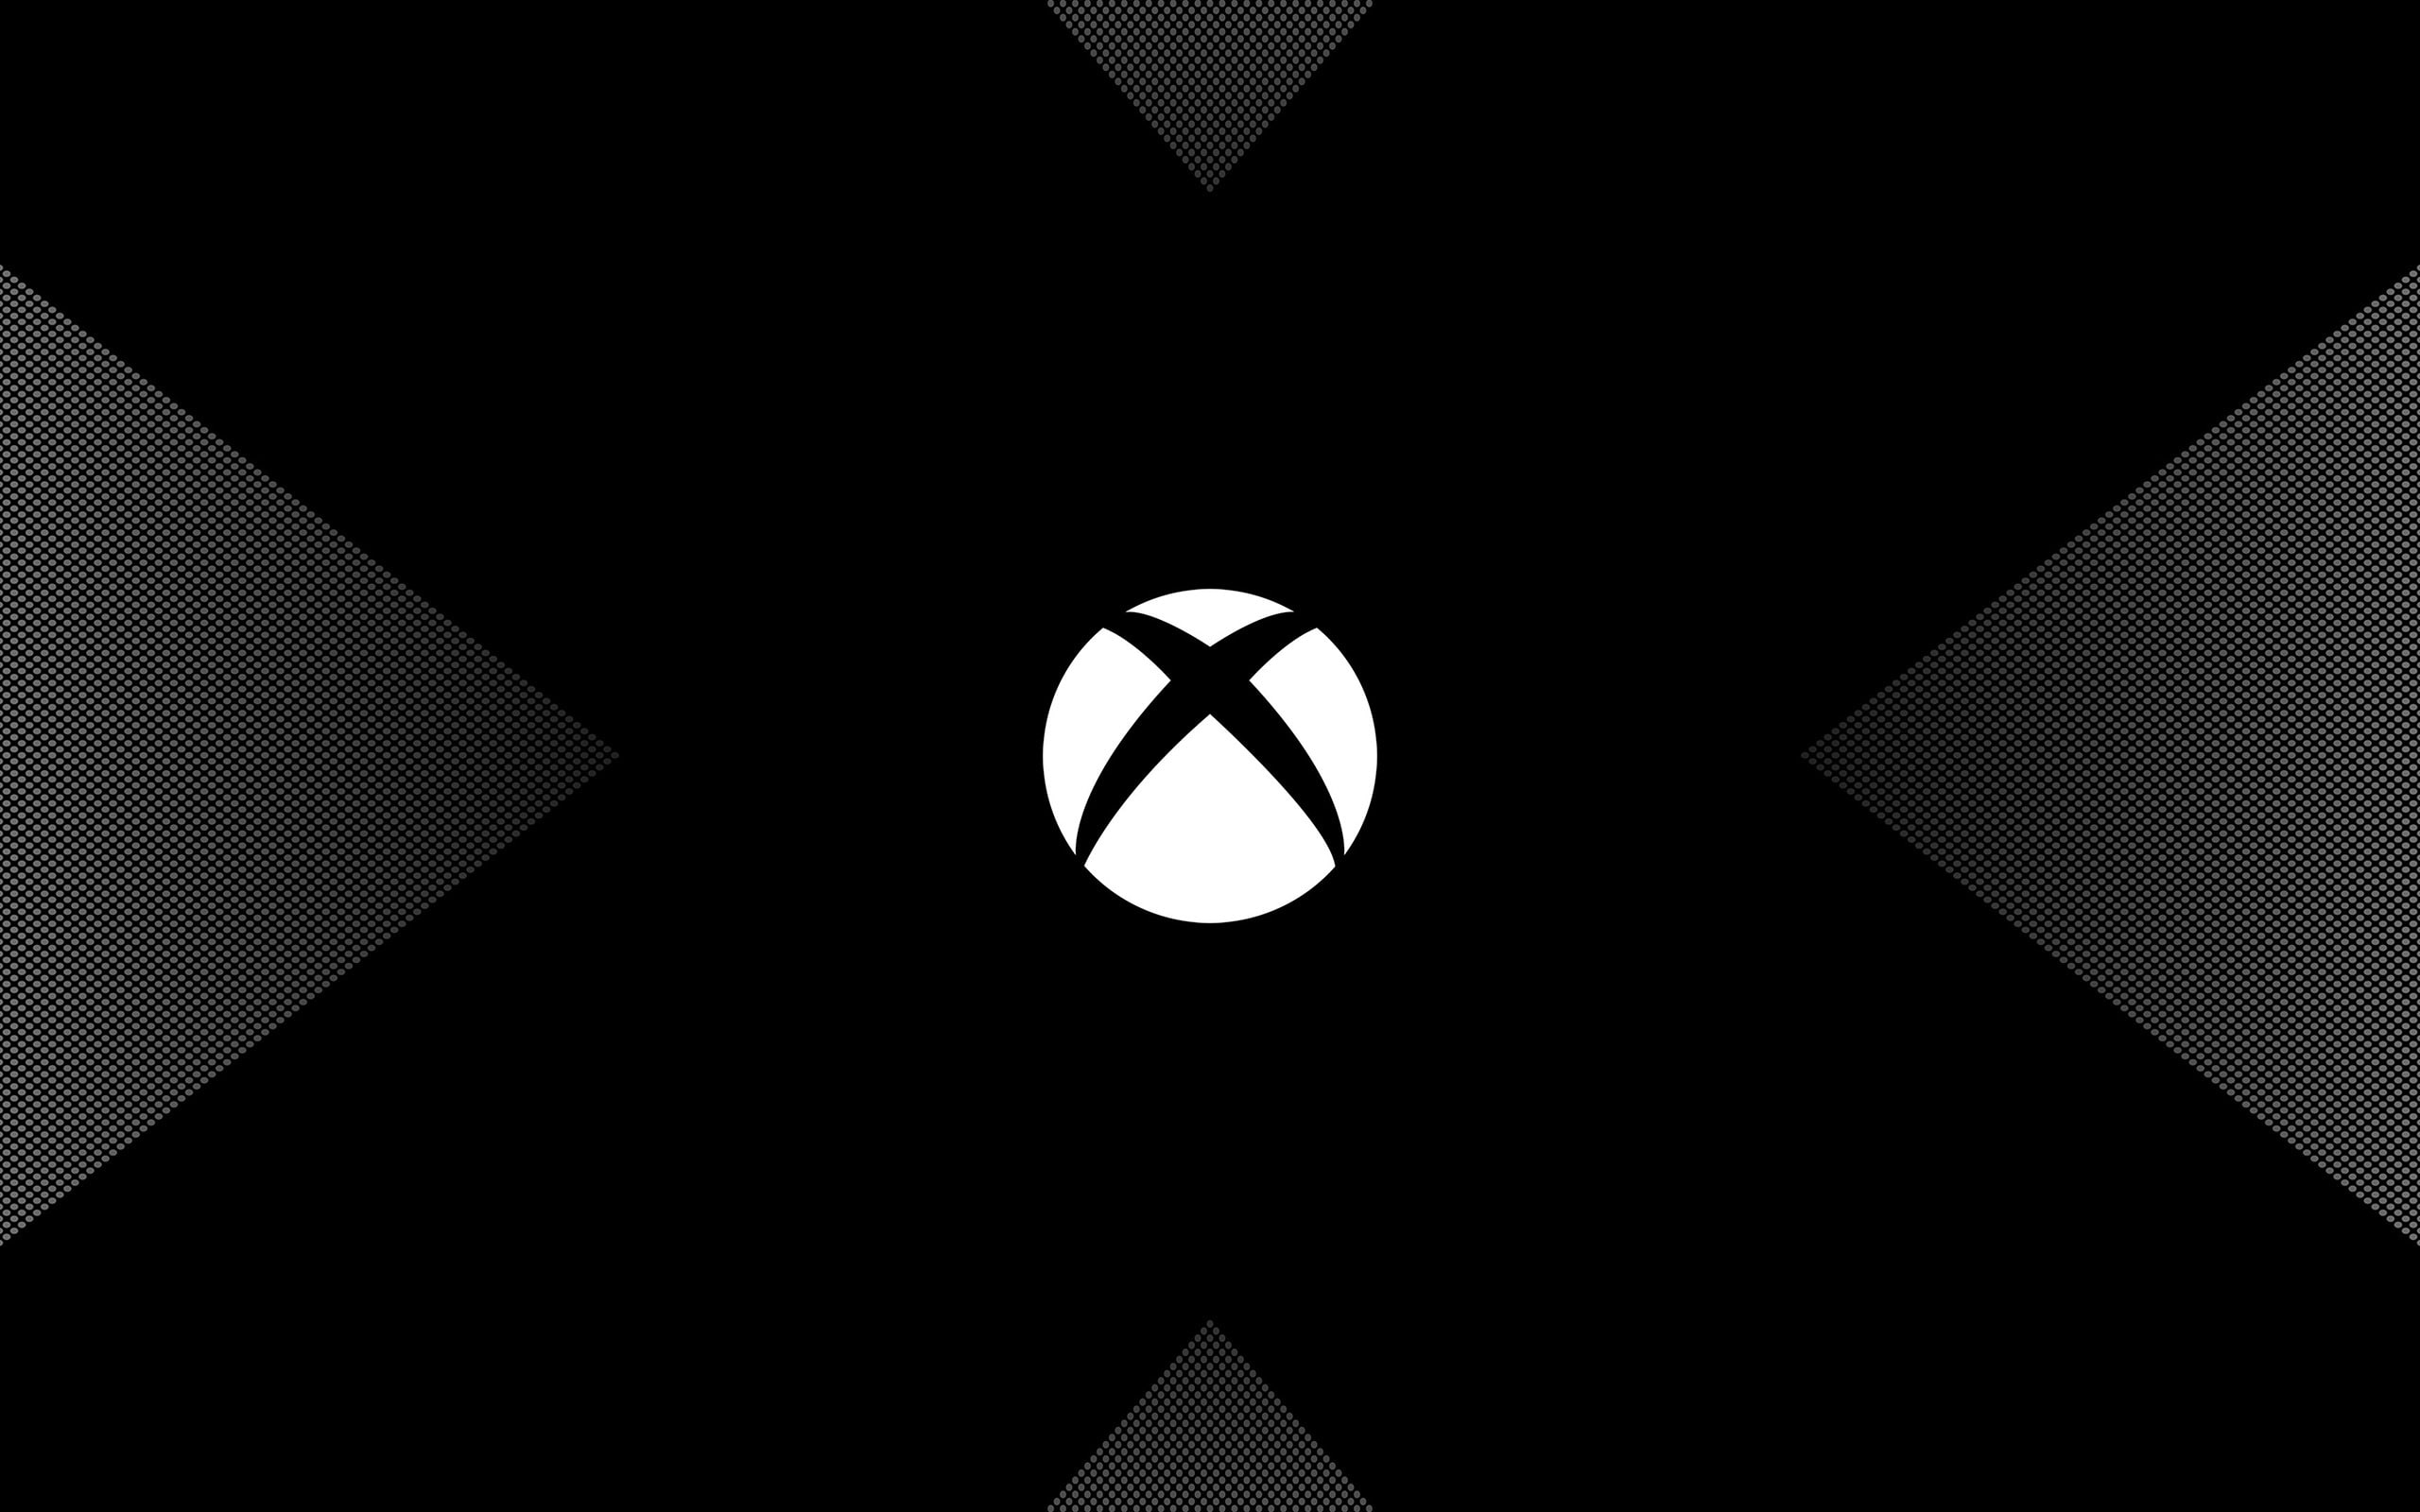 Xbox one x logo-2017 High Quality Wallpapers, indoors, lighting equipment